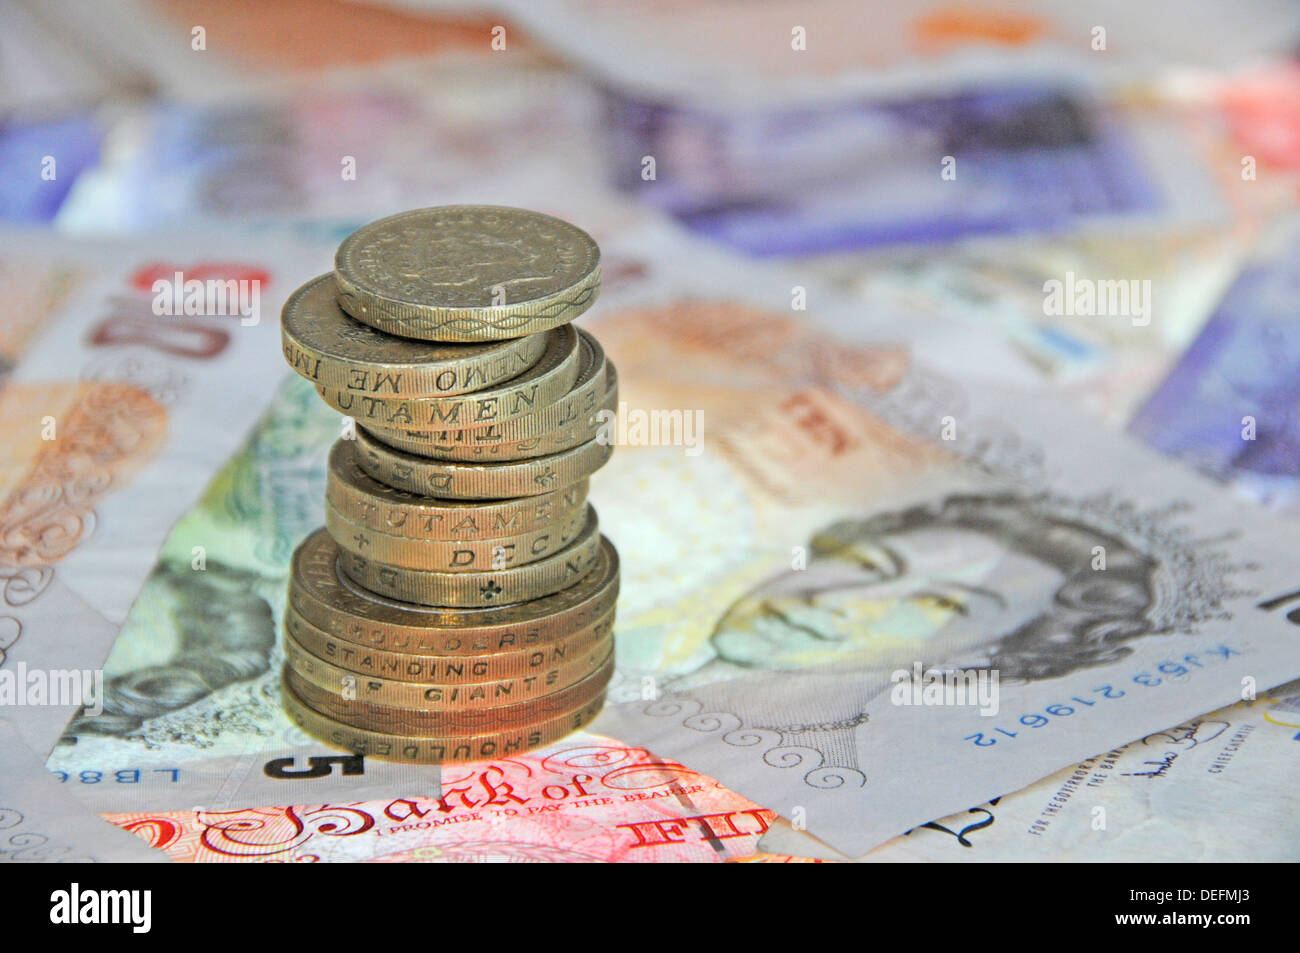 pile of coins Cash money UK currency Stock Photo